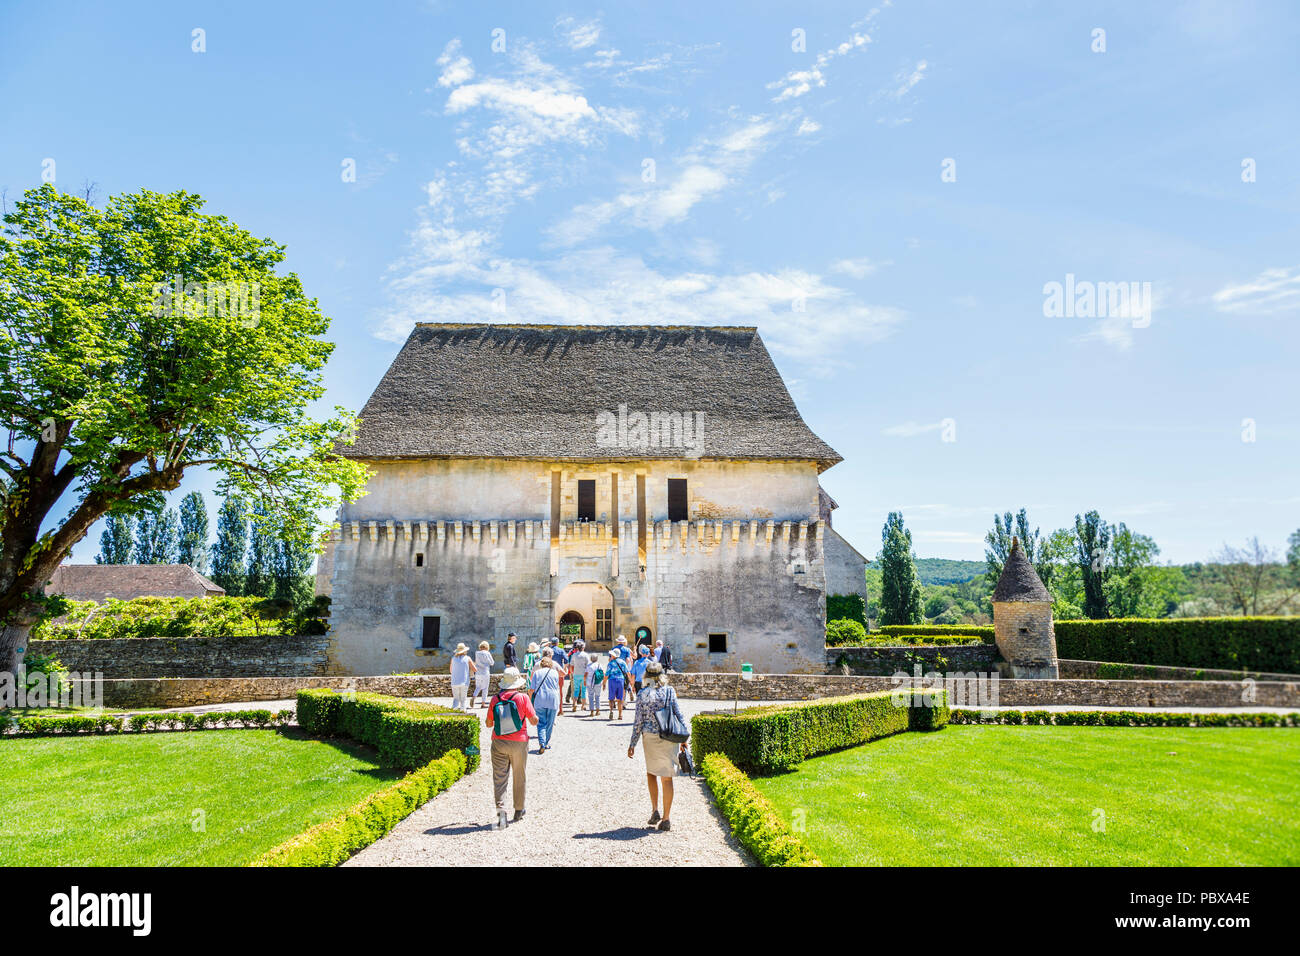 Entrance to the Chateau de Losse, a medieval French Historical House and Site, in Périgord, Dordogne district, South-West France on a sunny day Stock Photo